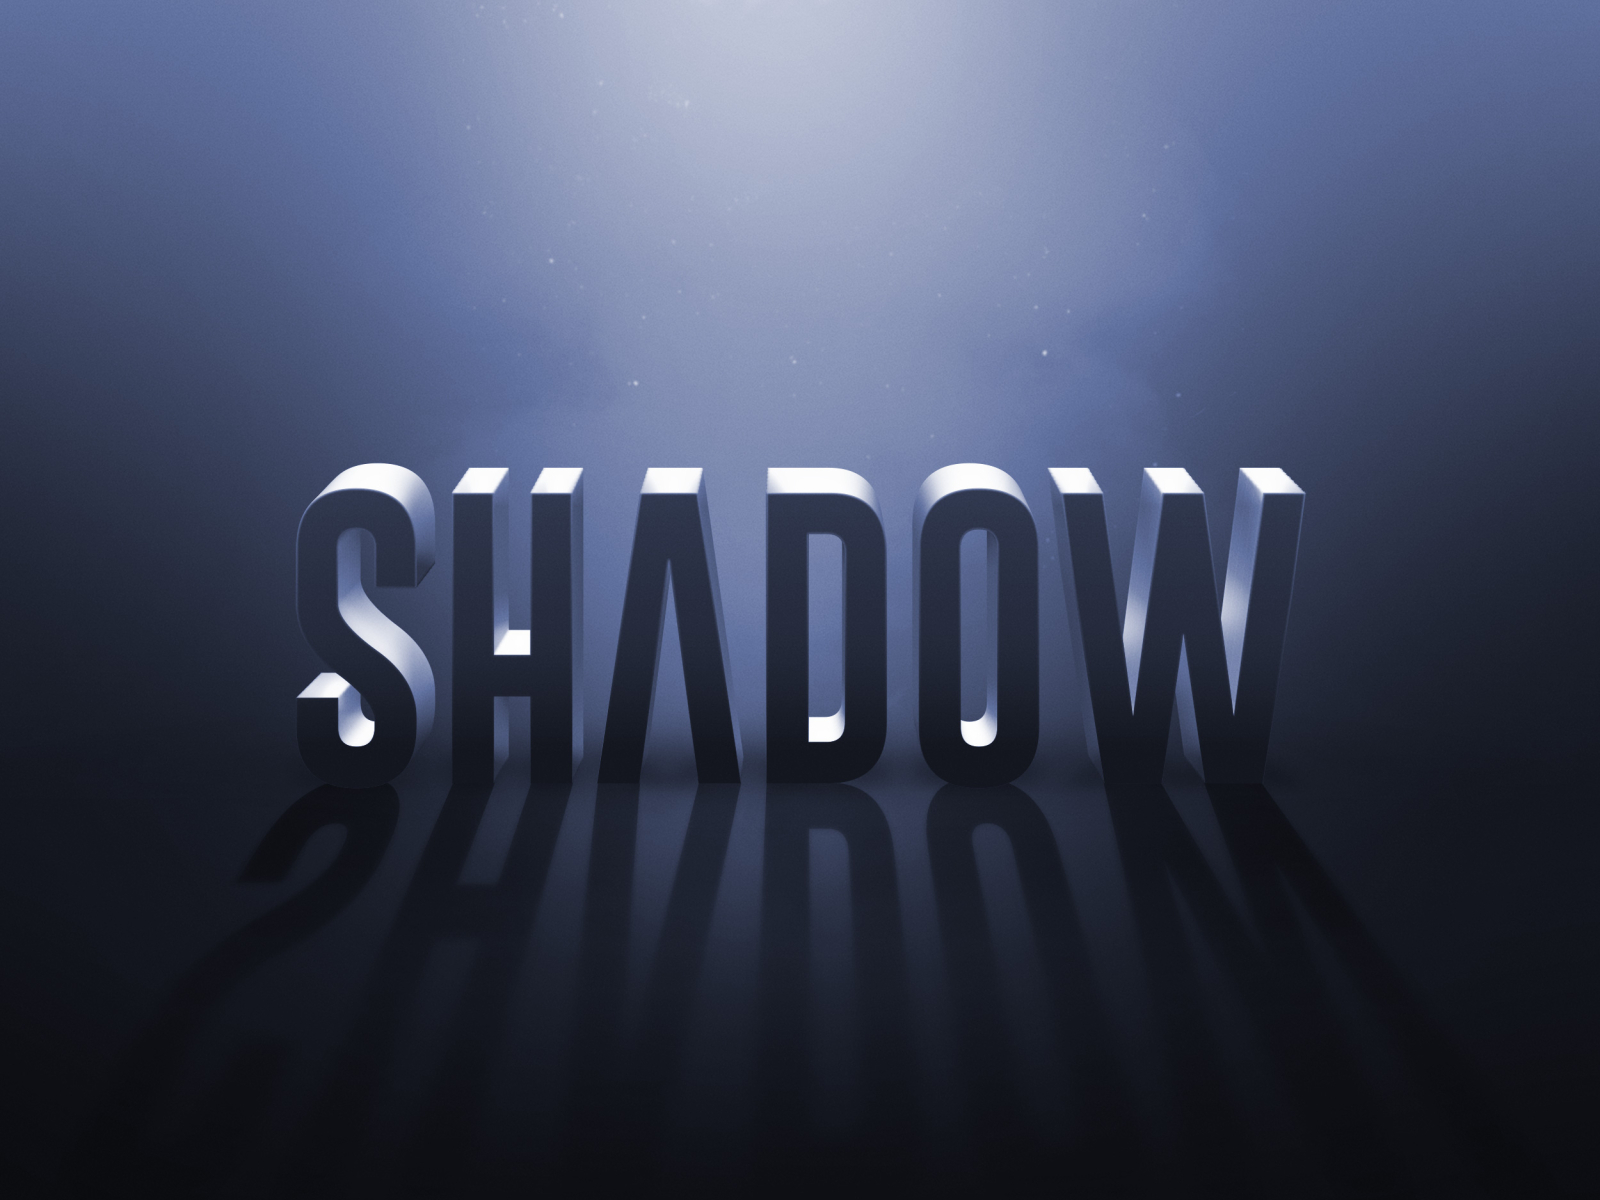 cinematic-shadow-text-effect-premium-collection-by-designercow-on